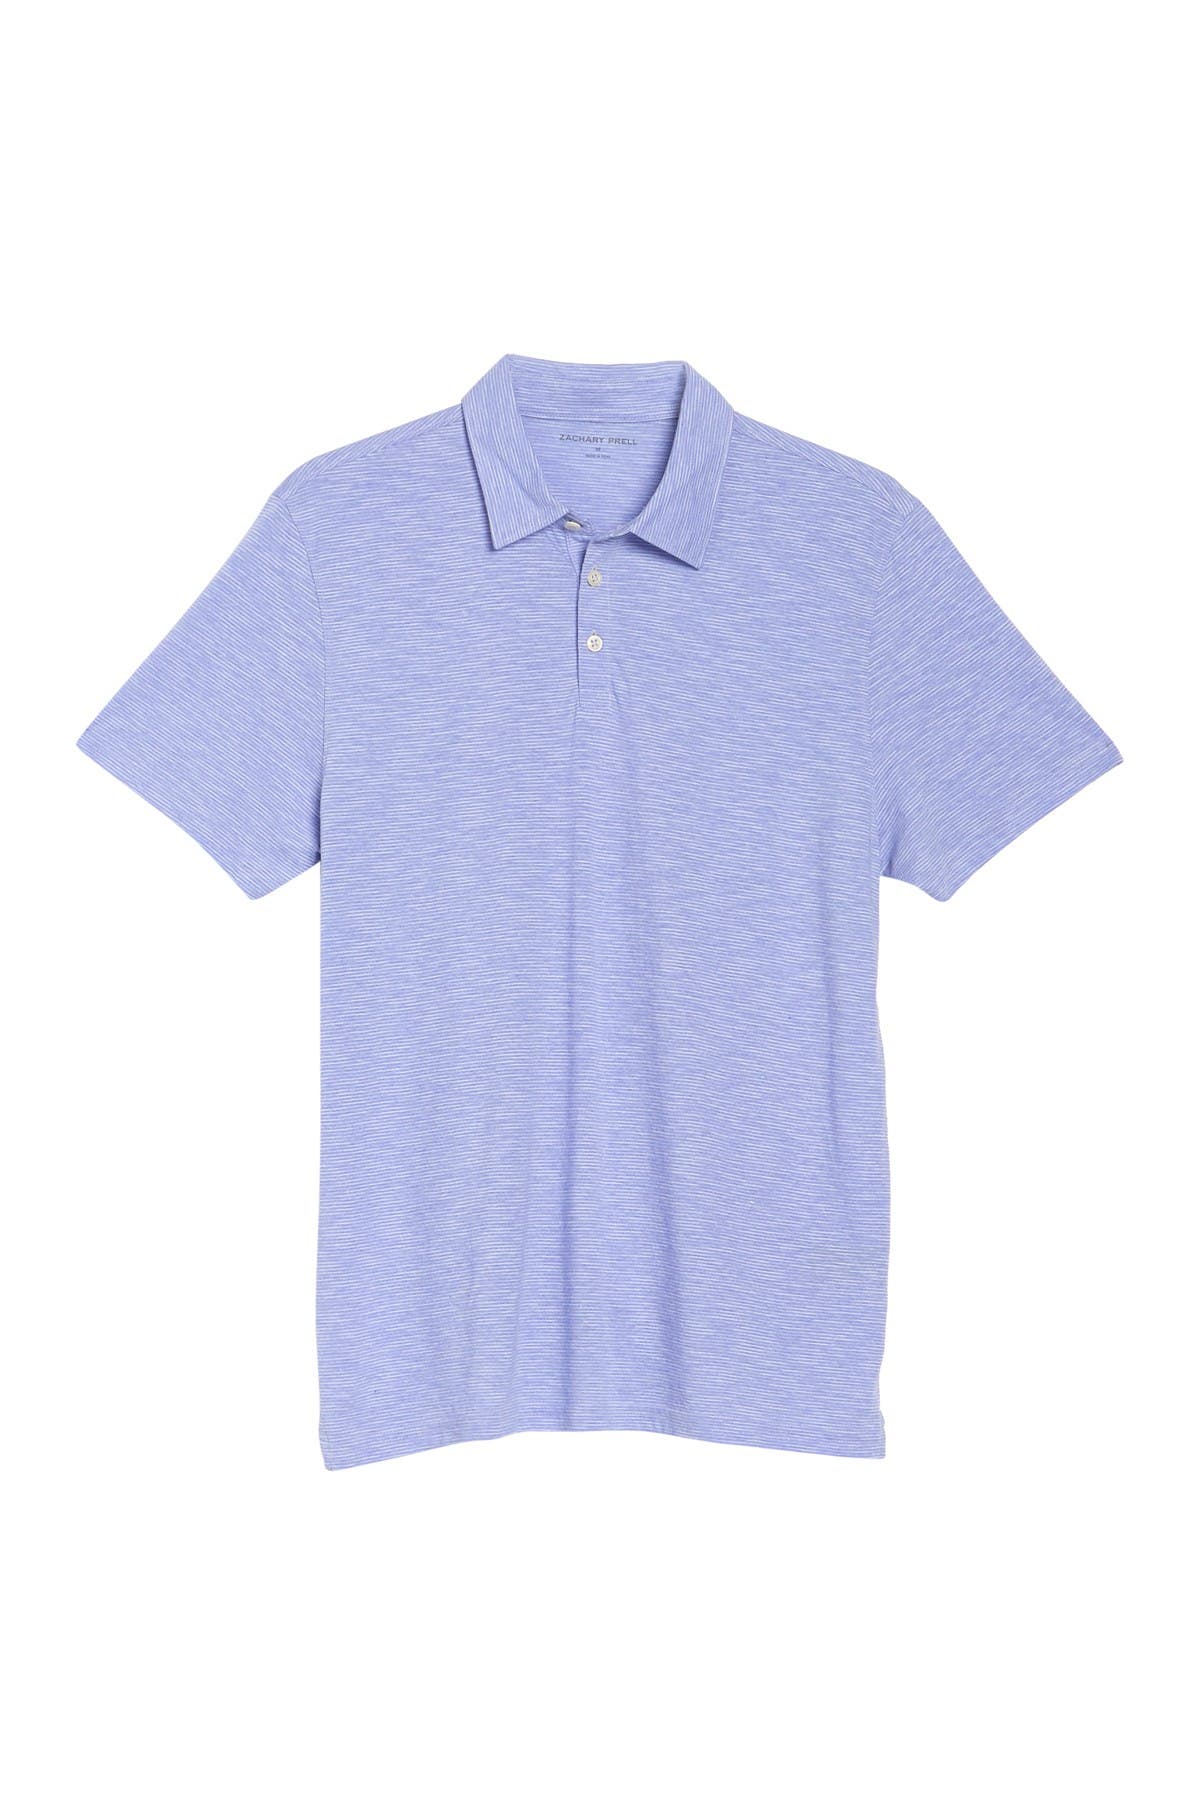 Zachary Prell Short Sleeve Polo Shirt In Violet